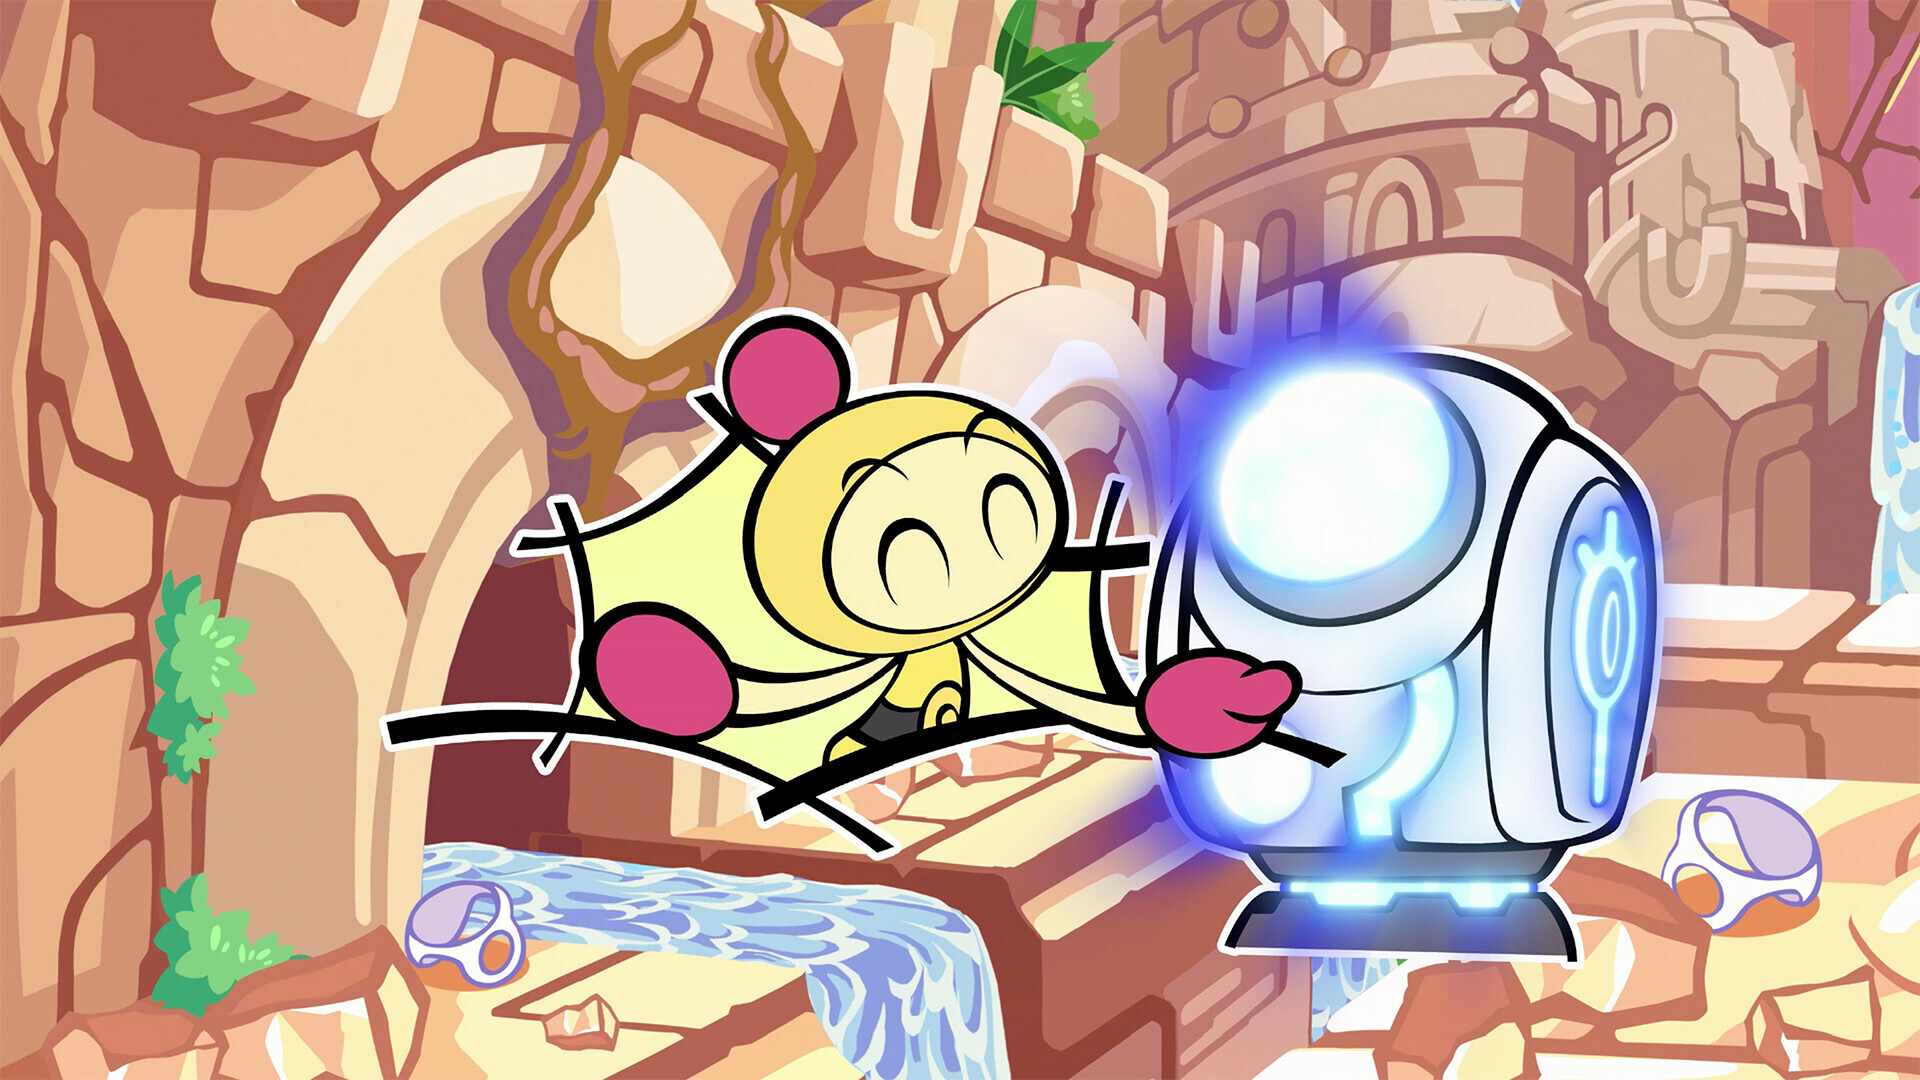 NOW AVAILABLE: Super Bomberman R2 The Bomberman Brothers are back